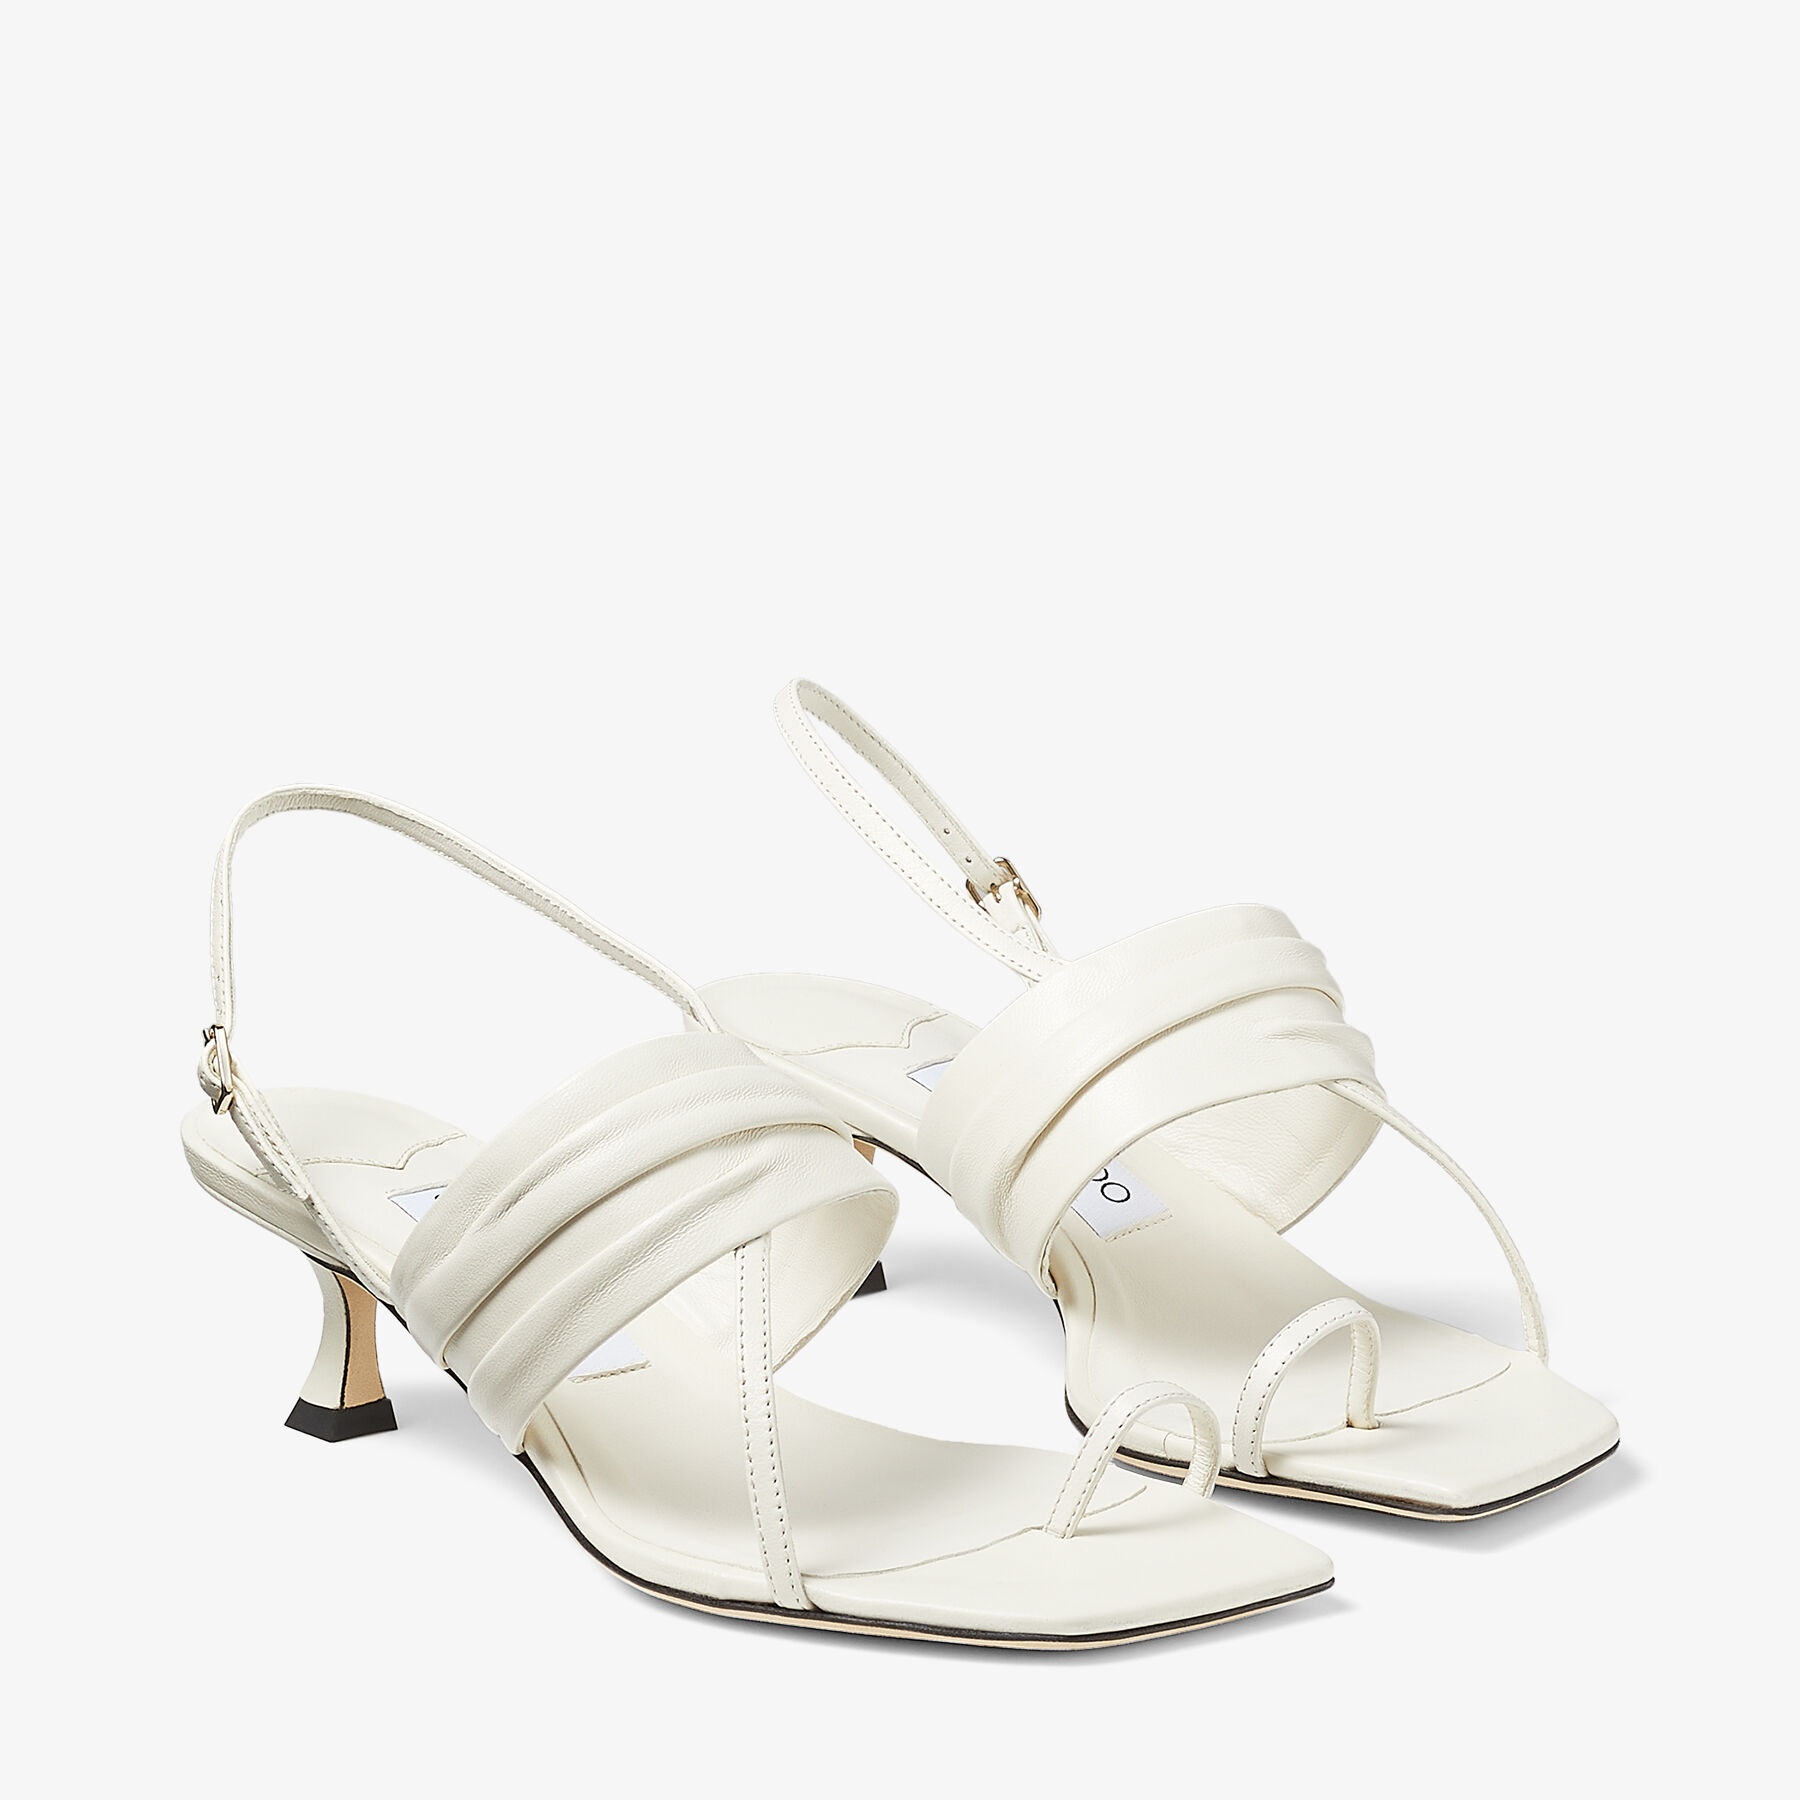 Beziers 50
Latte Nappa Leather Sandals - 3